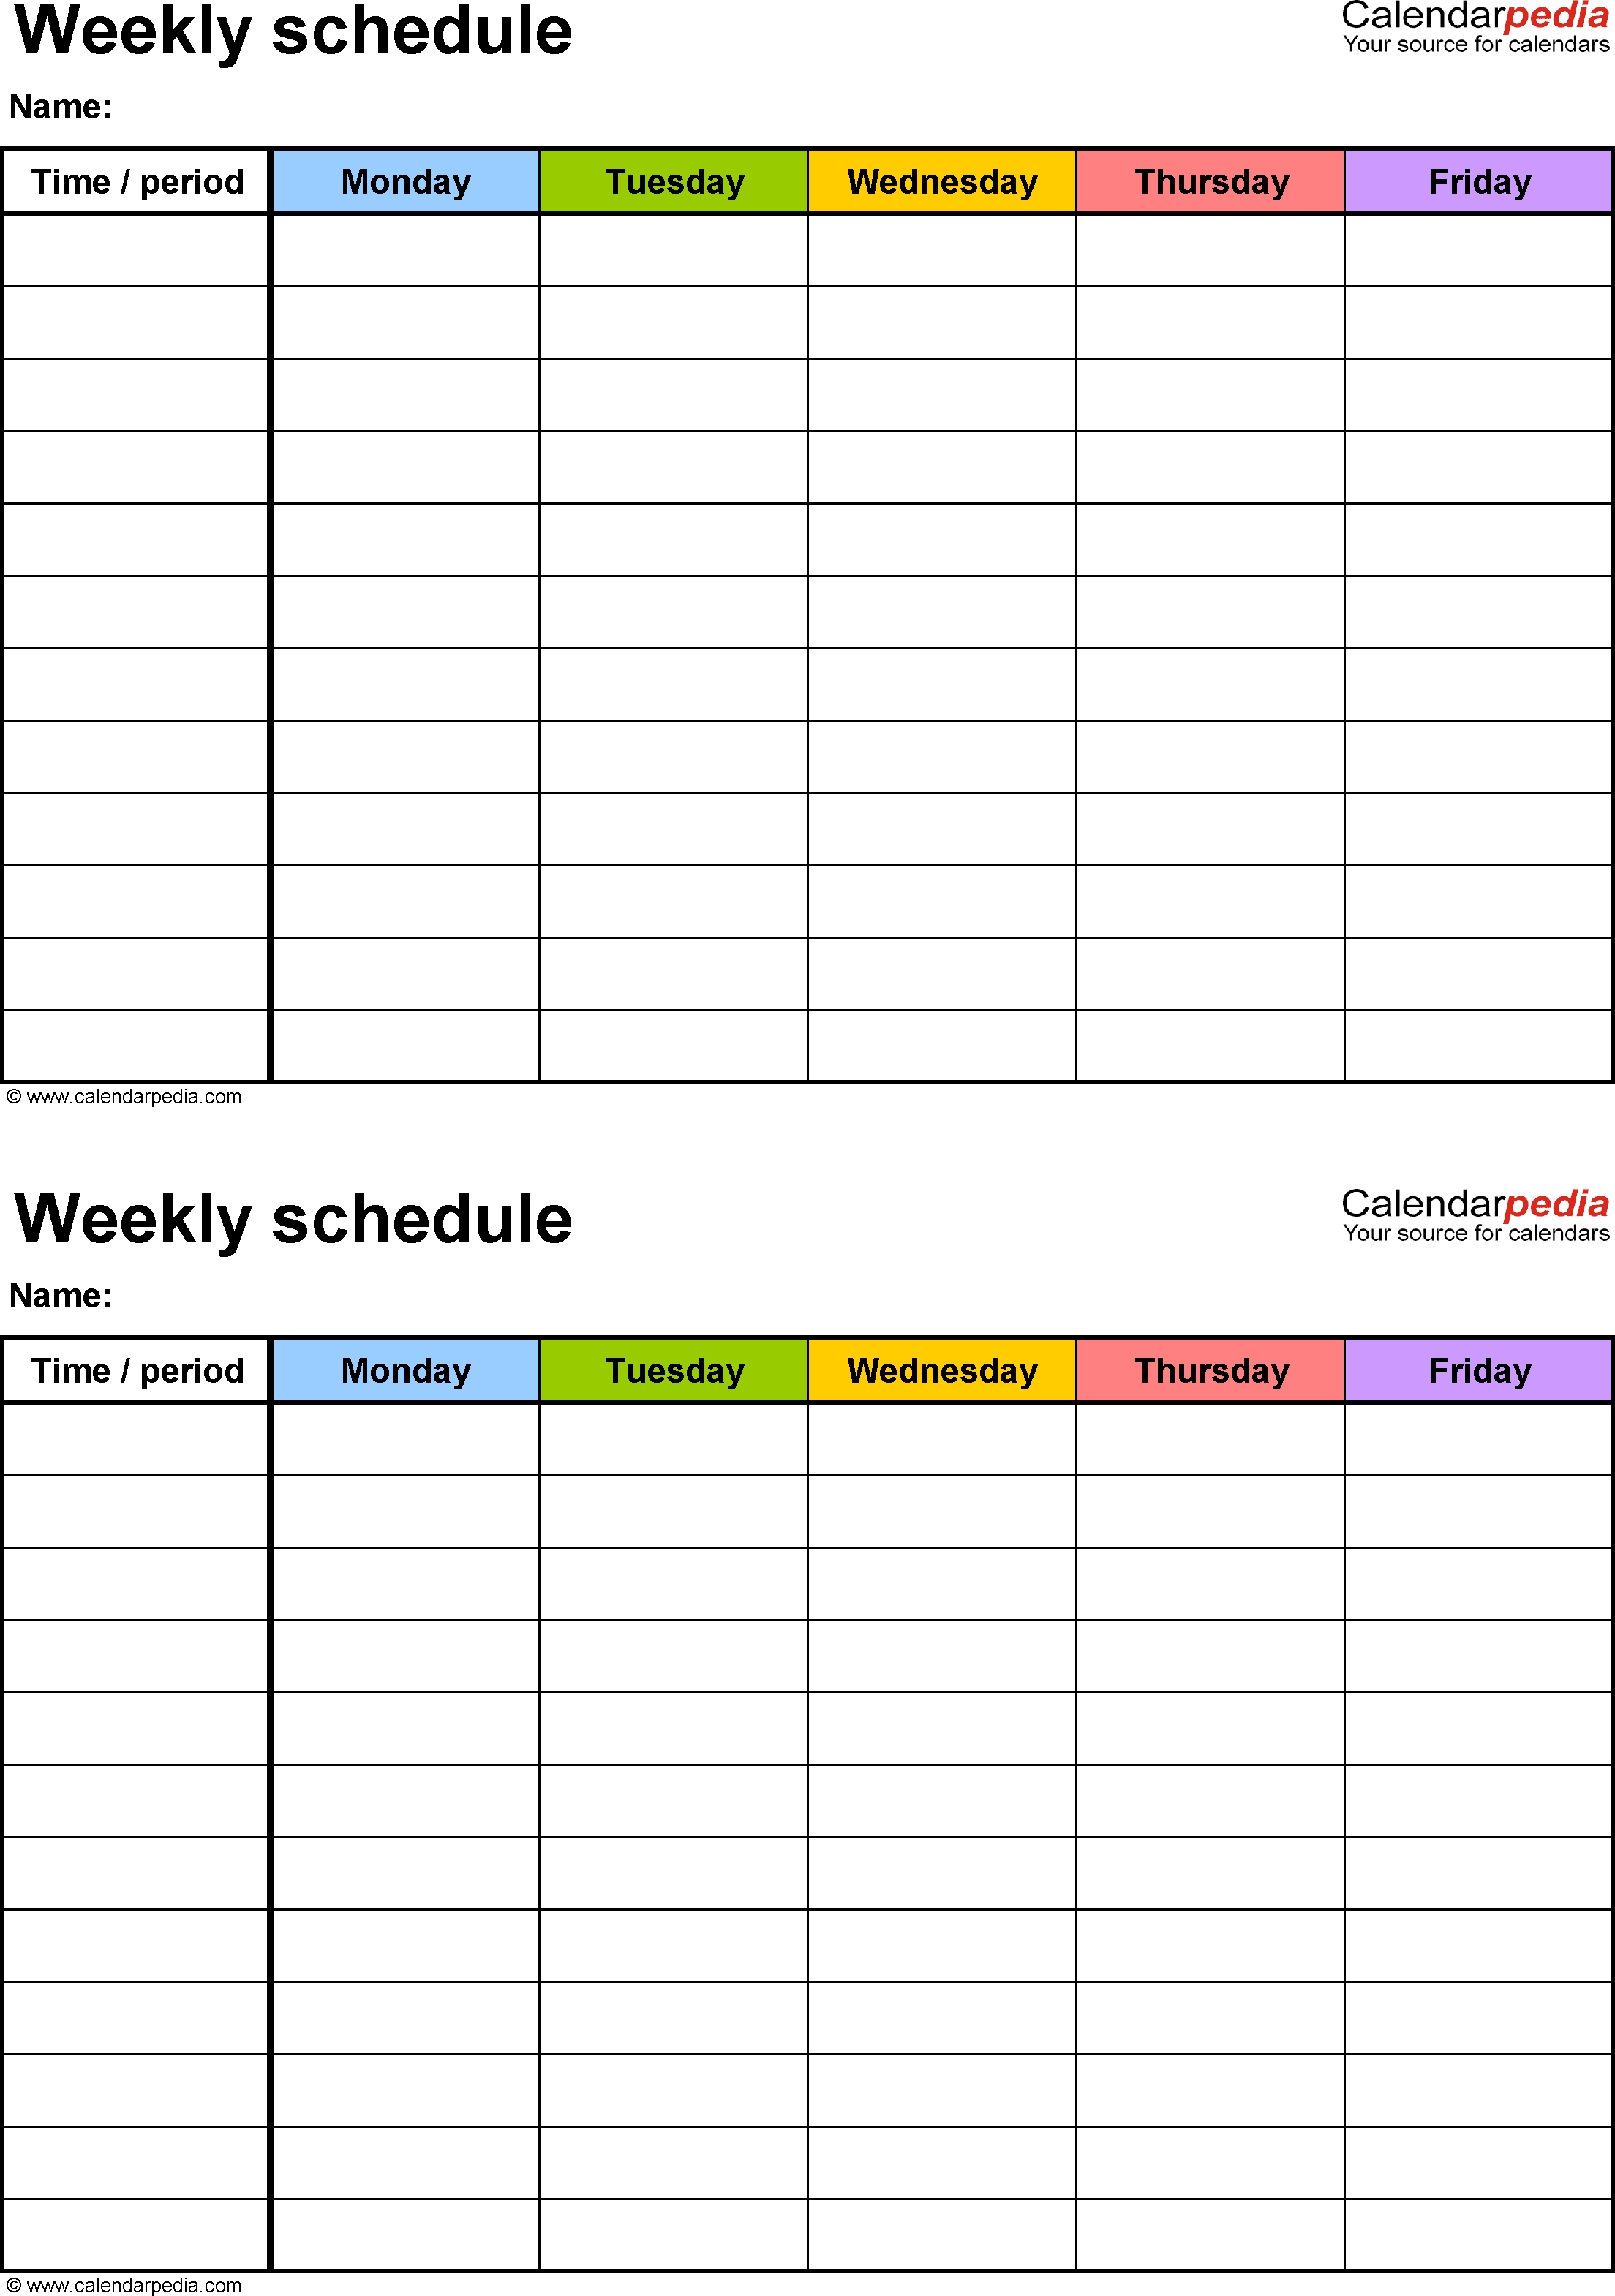 Free Weekly Schedule Templates For Pdf - 18 Templates Week Calendar Template Pdf